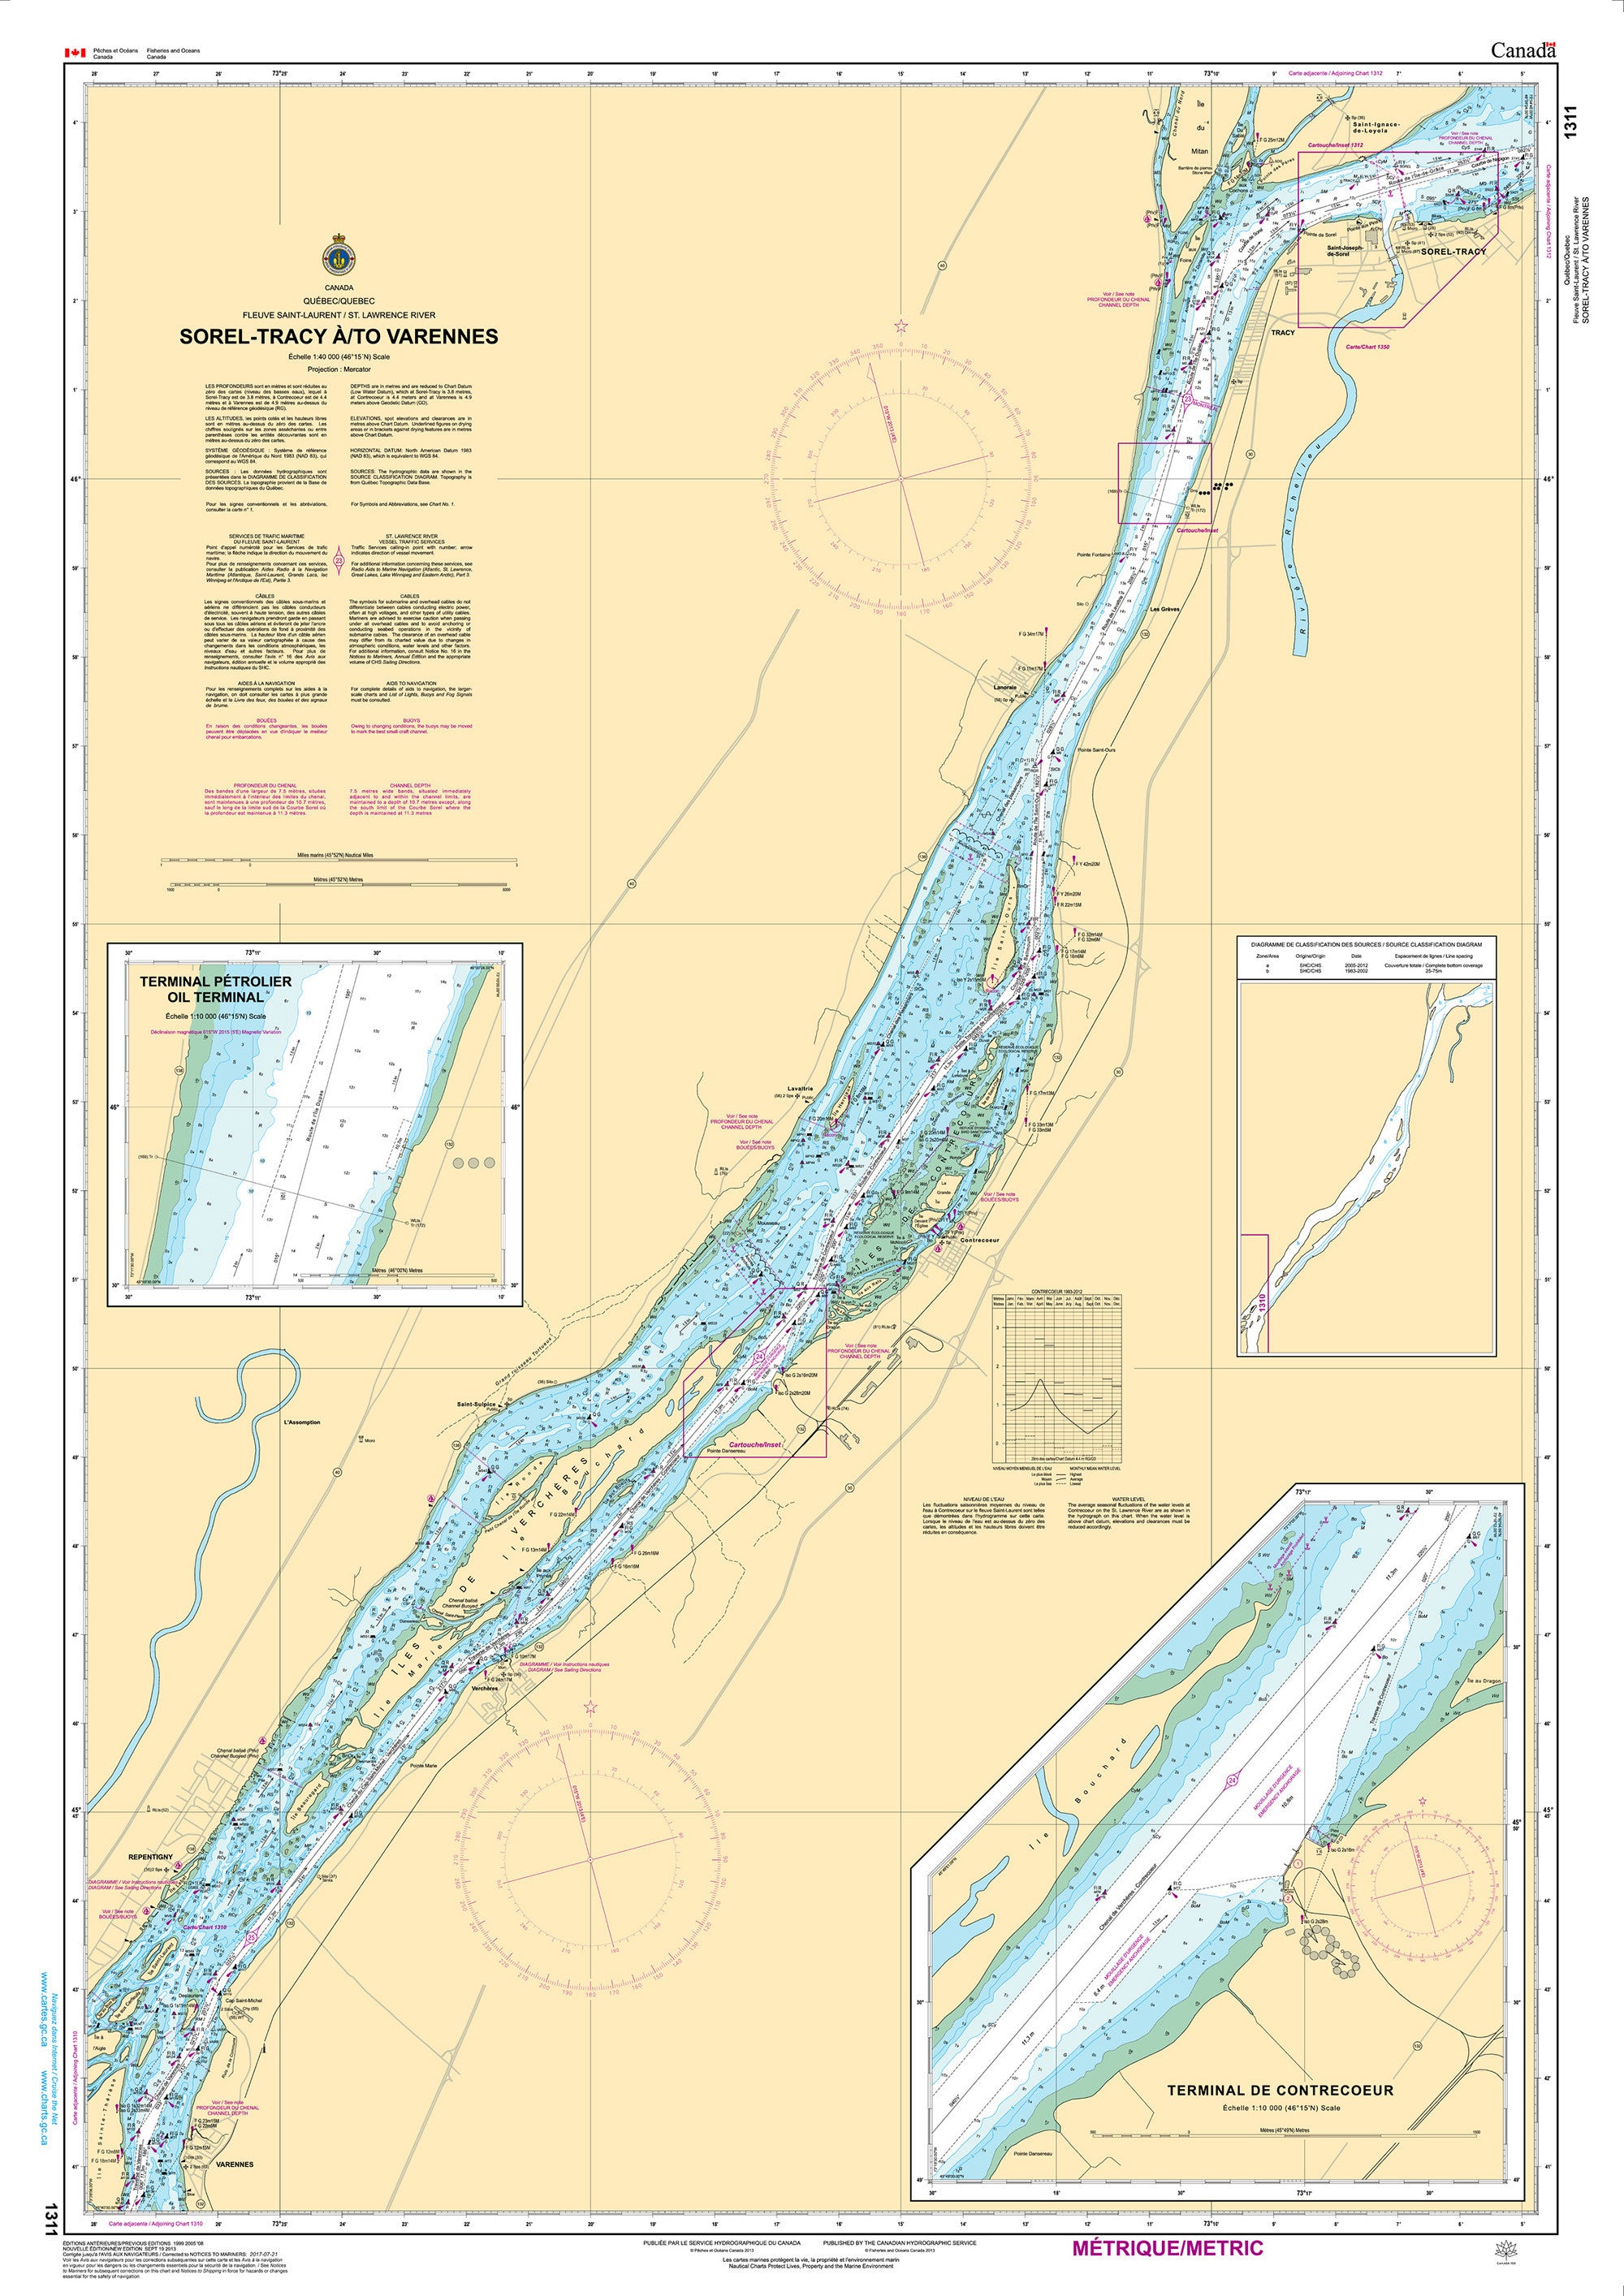 Canadian Hydrographic Service Nautical Chart CHS1311: Sorel-Tracy à/to Varennes